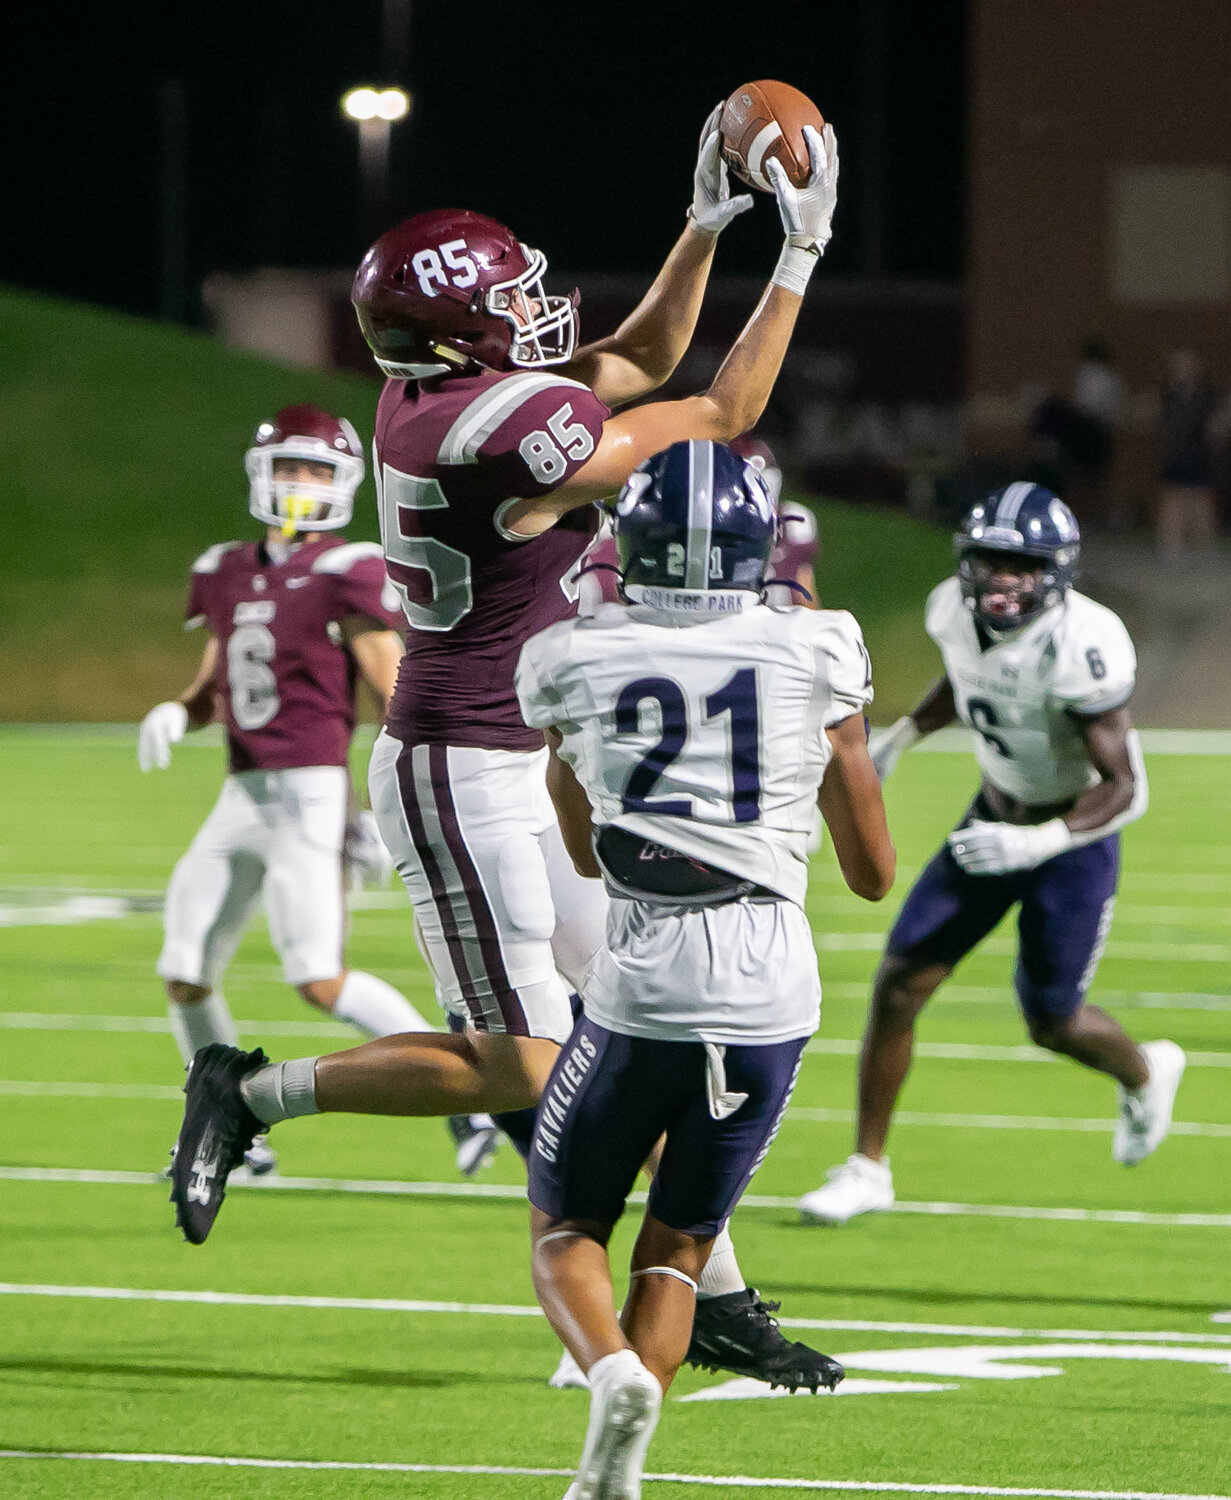 Kellen LeCronier catches a pass during Friday's game between Cinco Ranch and College Park at Rhodes Stadium.